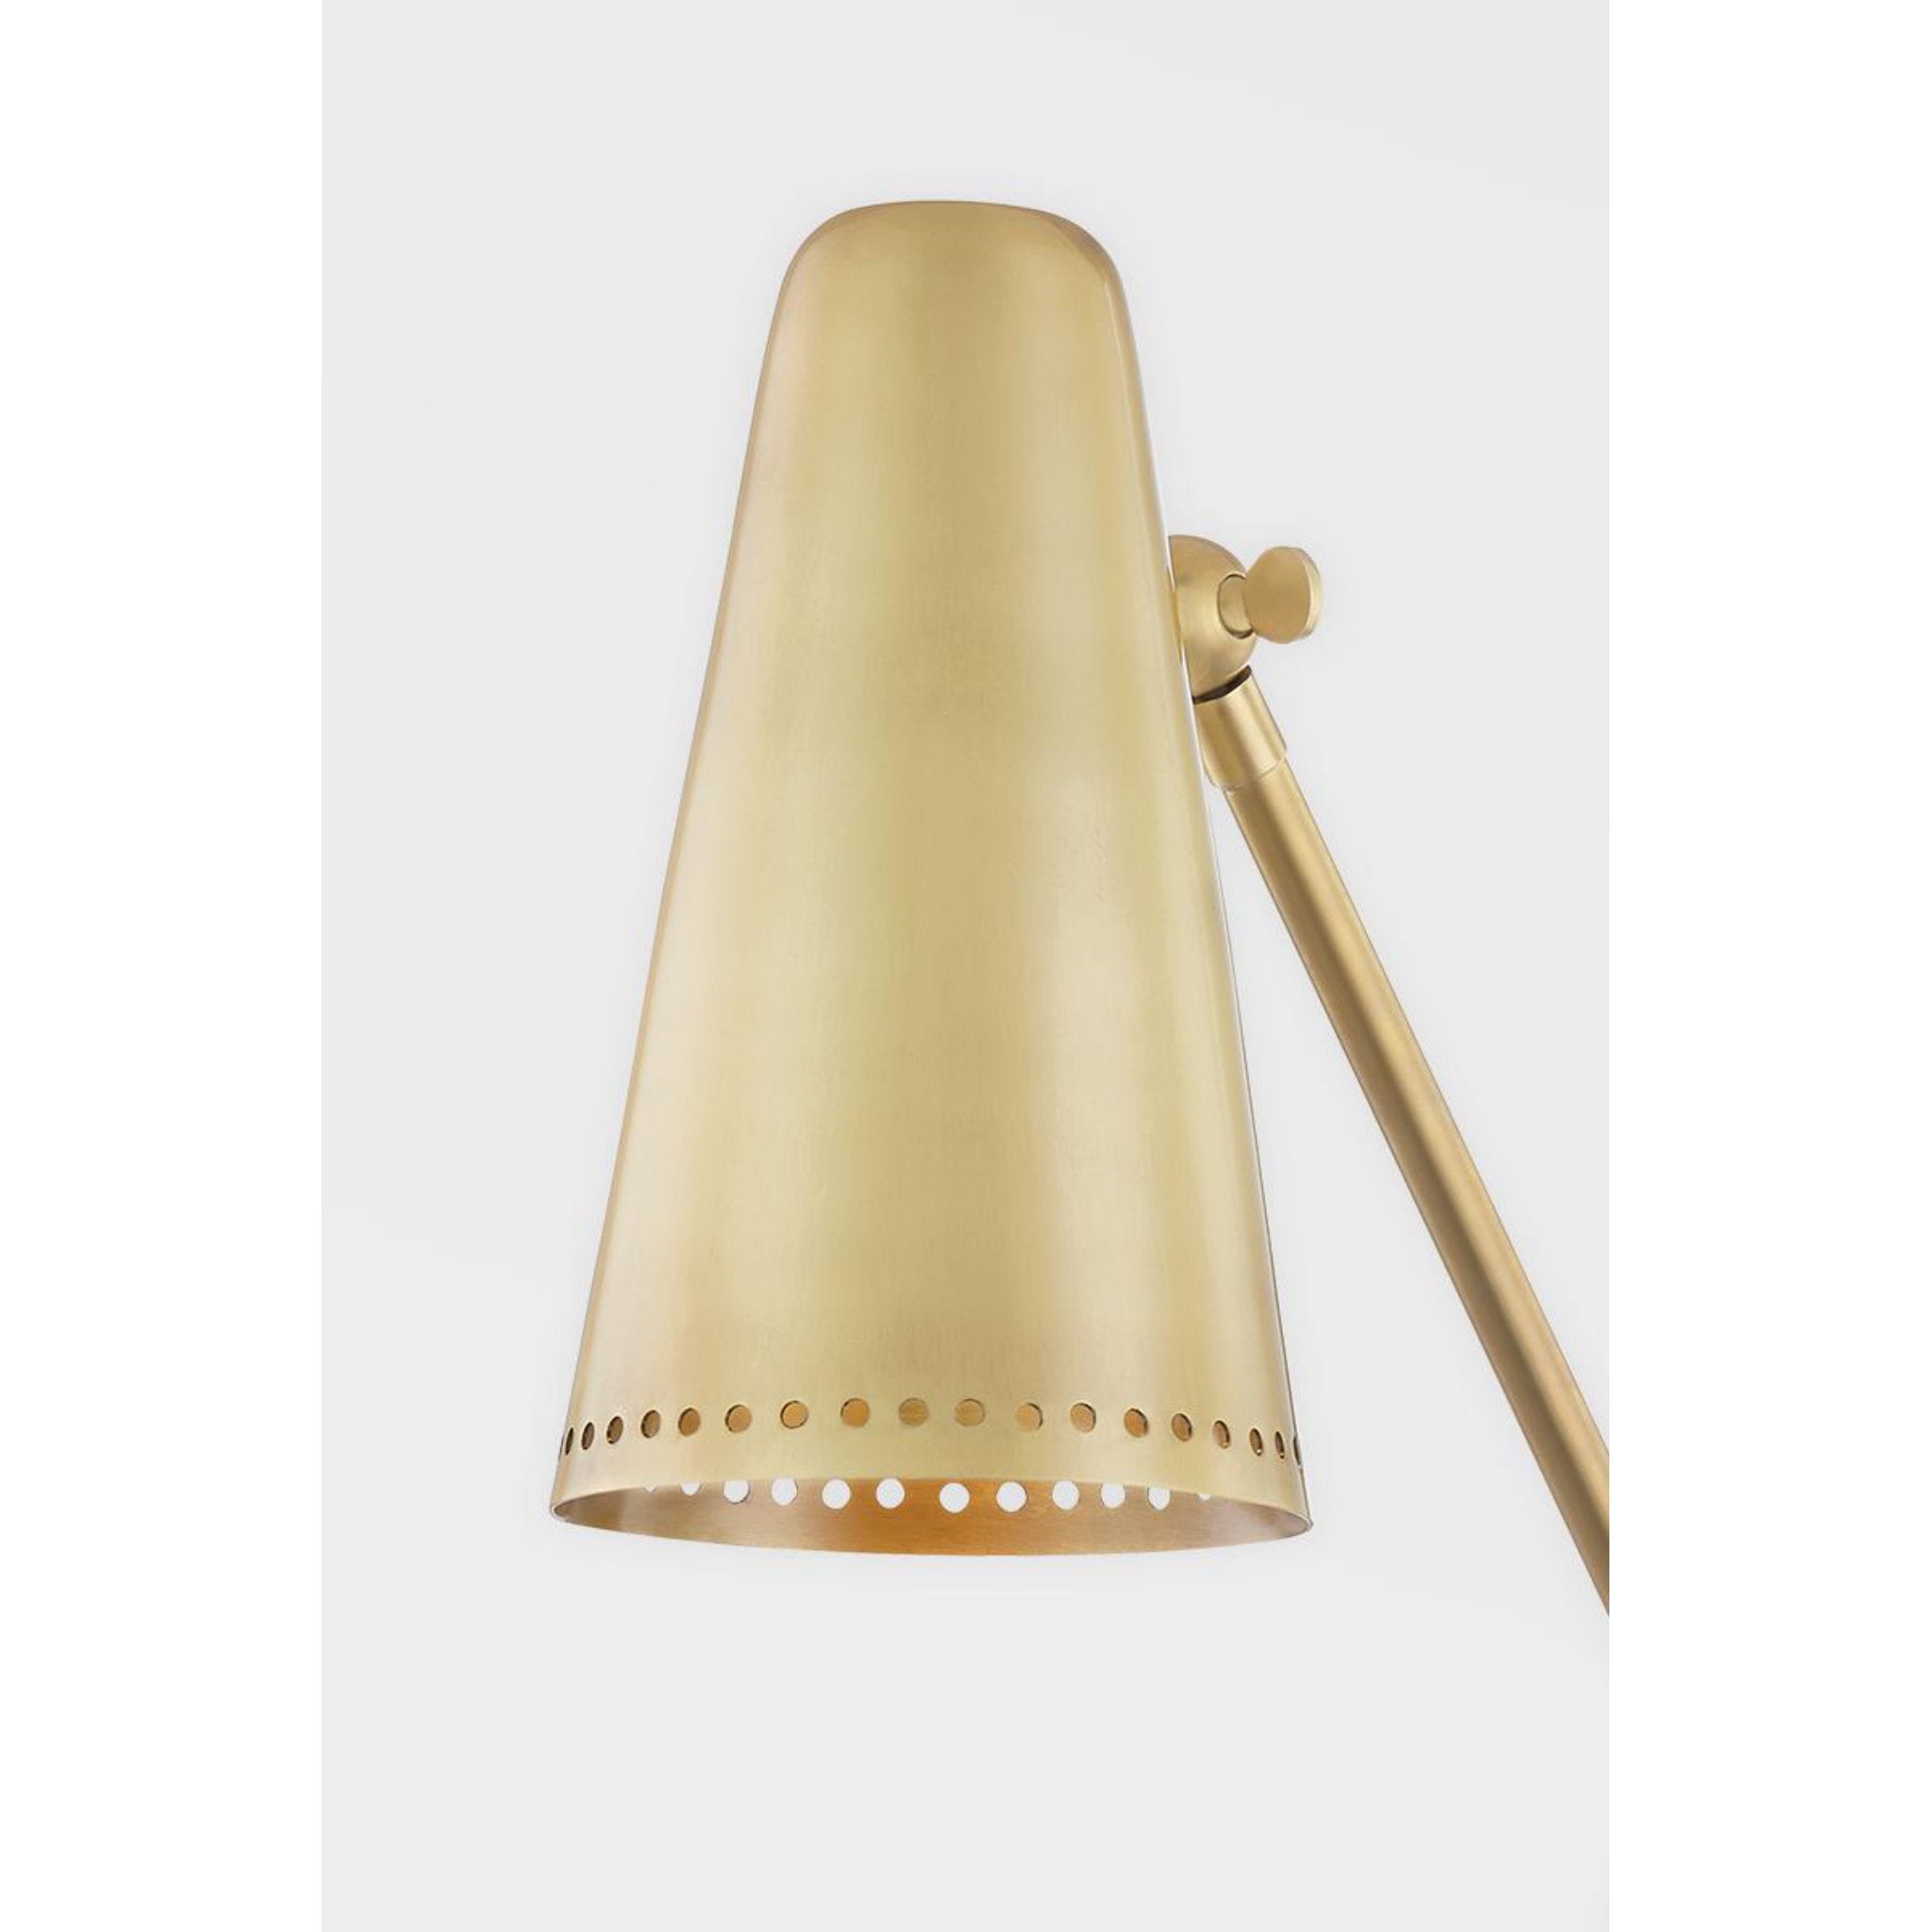 Easley 1 Light Wall Sconce in Aged Brass